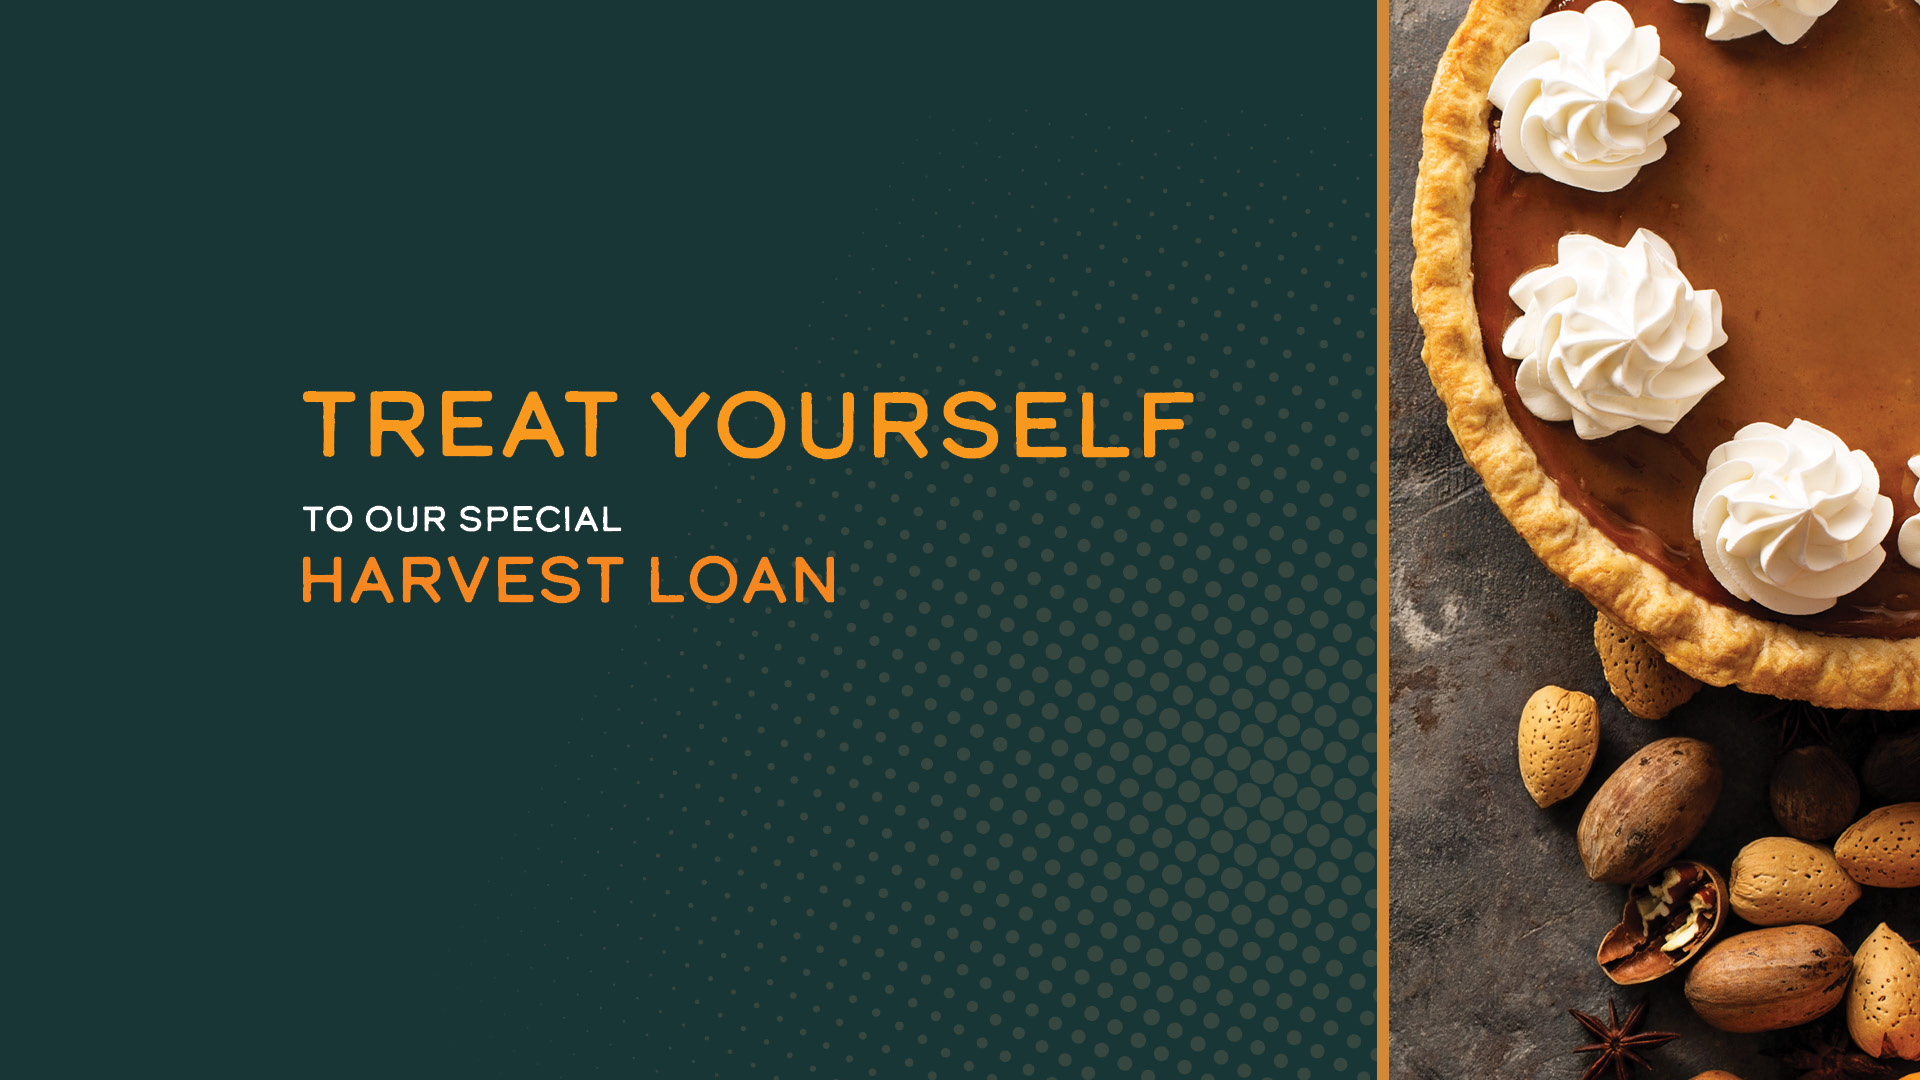 Treat yourself to our special harvest loan!